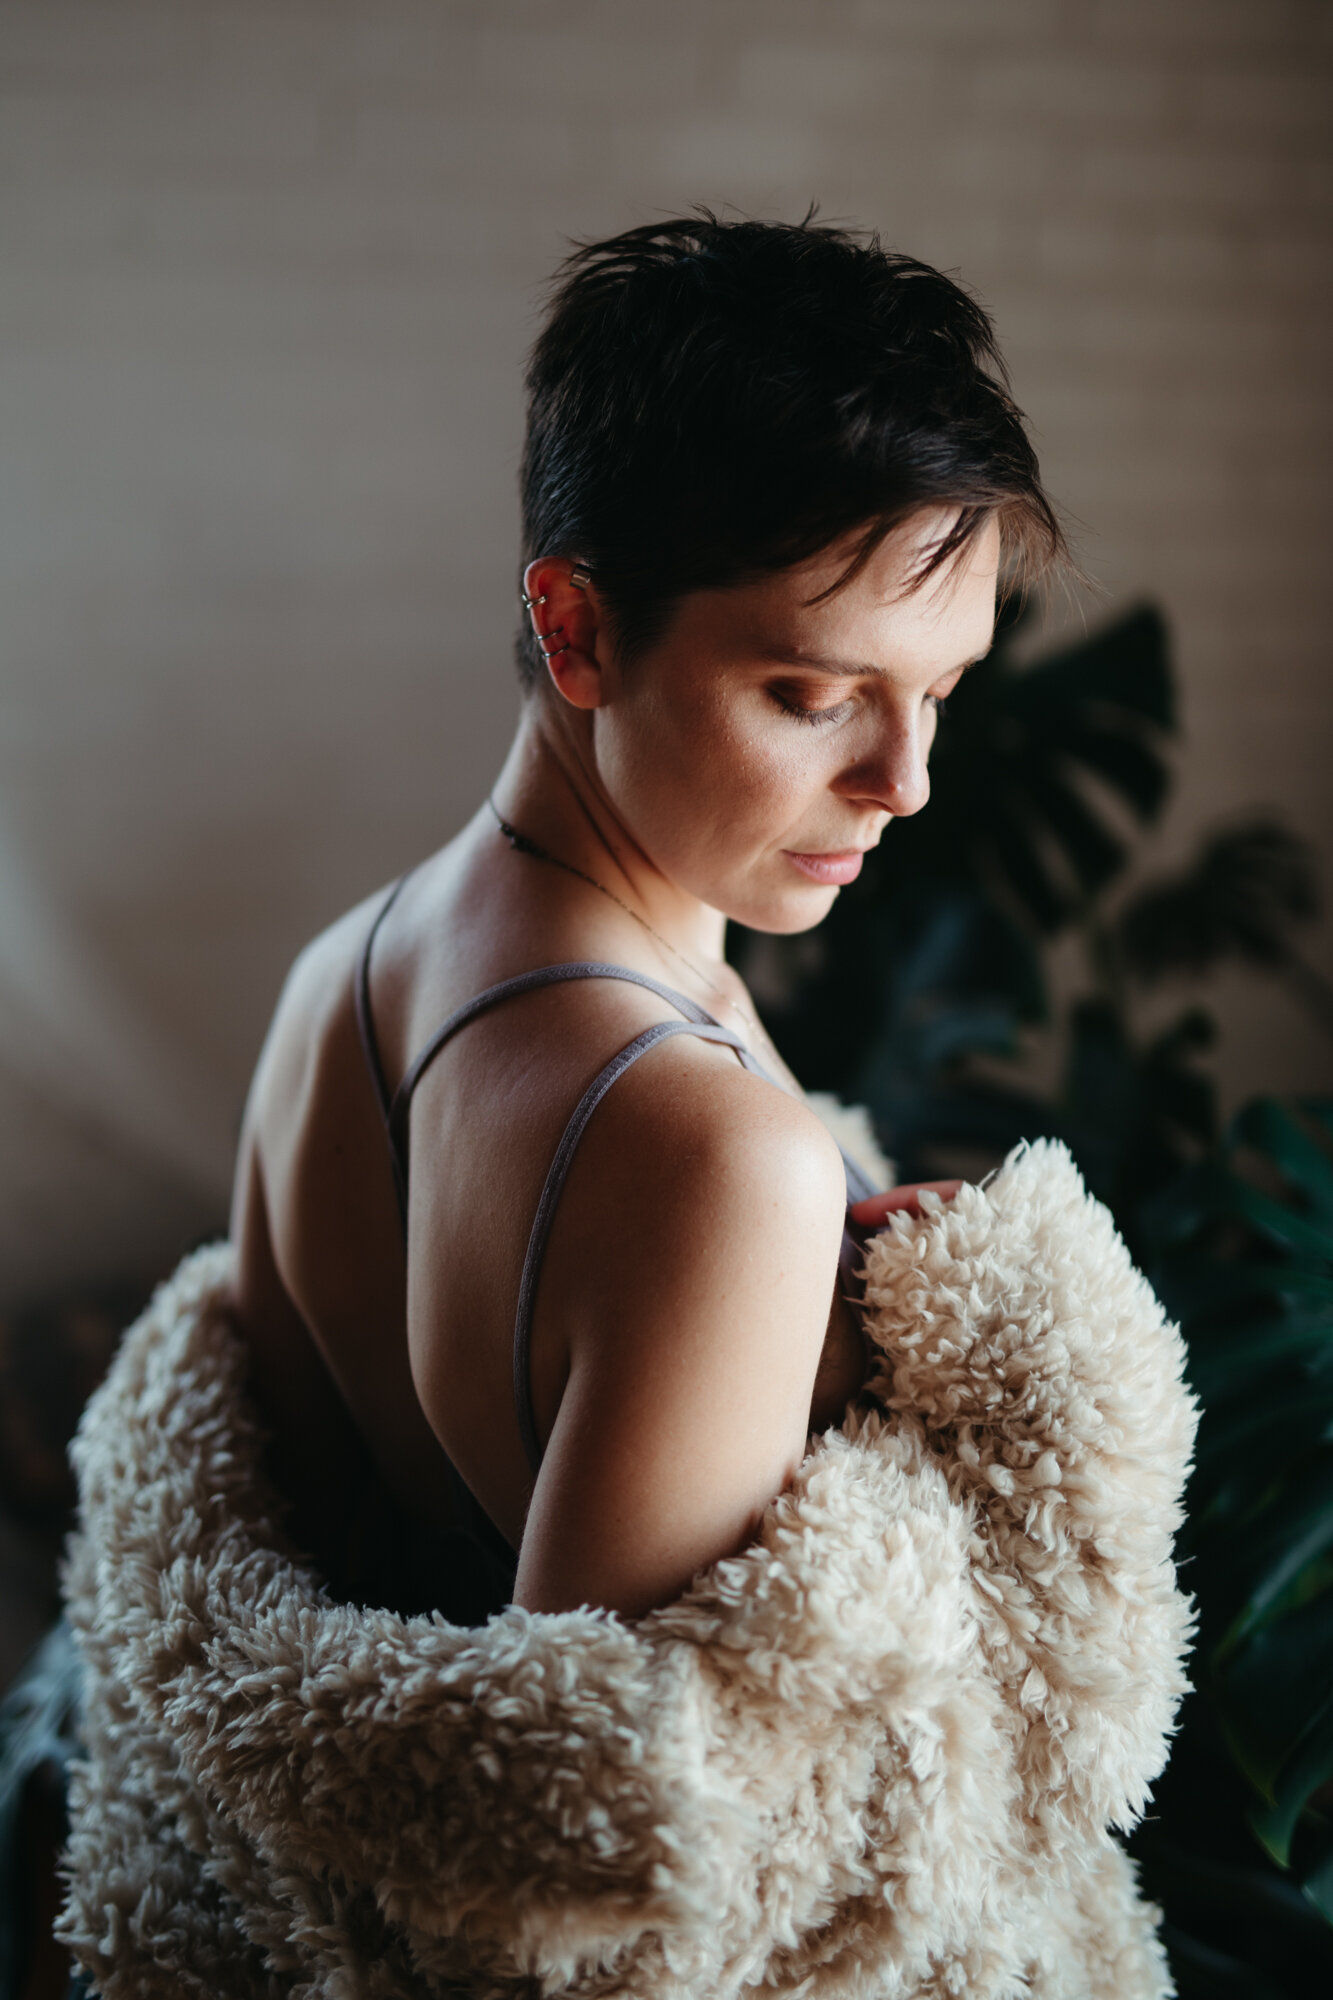 Person with short brown hair looks down with fuzzy coat sliding off their back exposing their shoulders